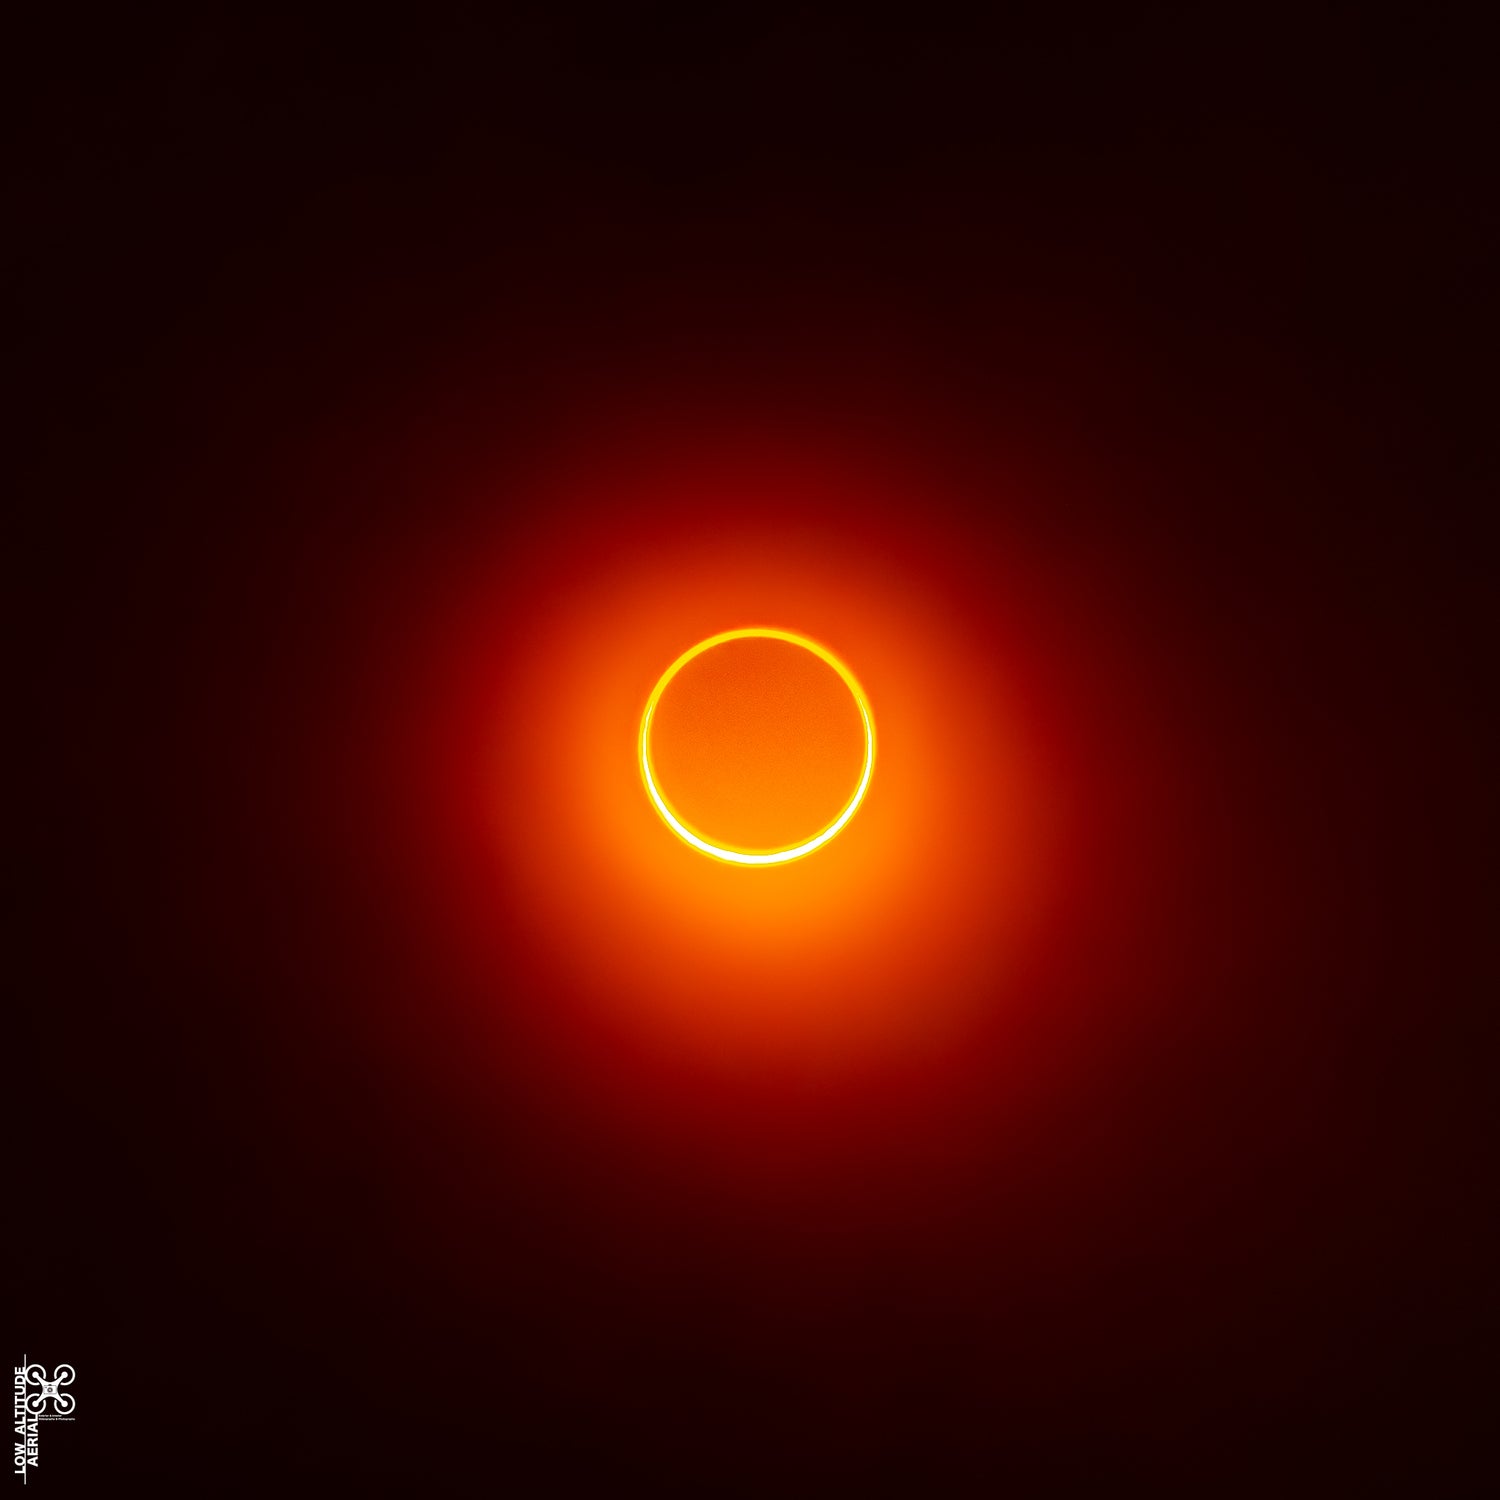 Annular and Total Solar Eclipse